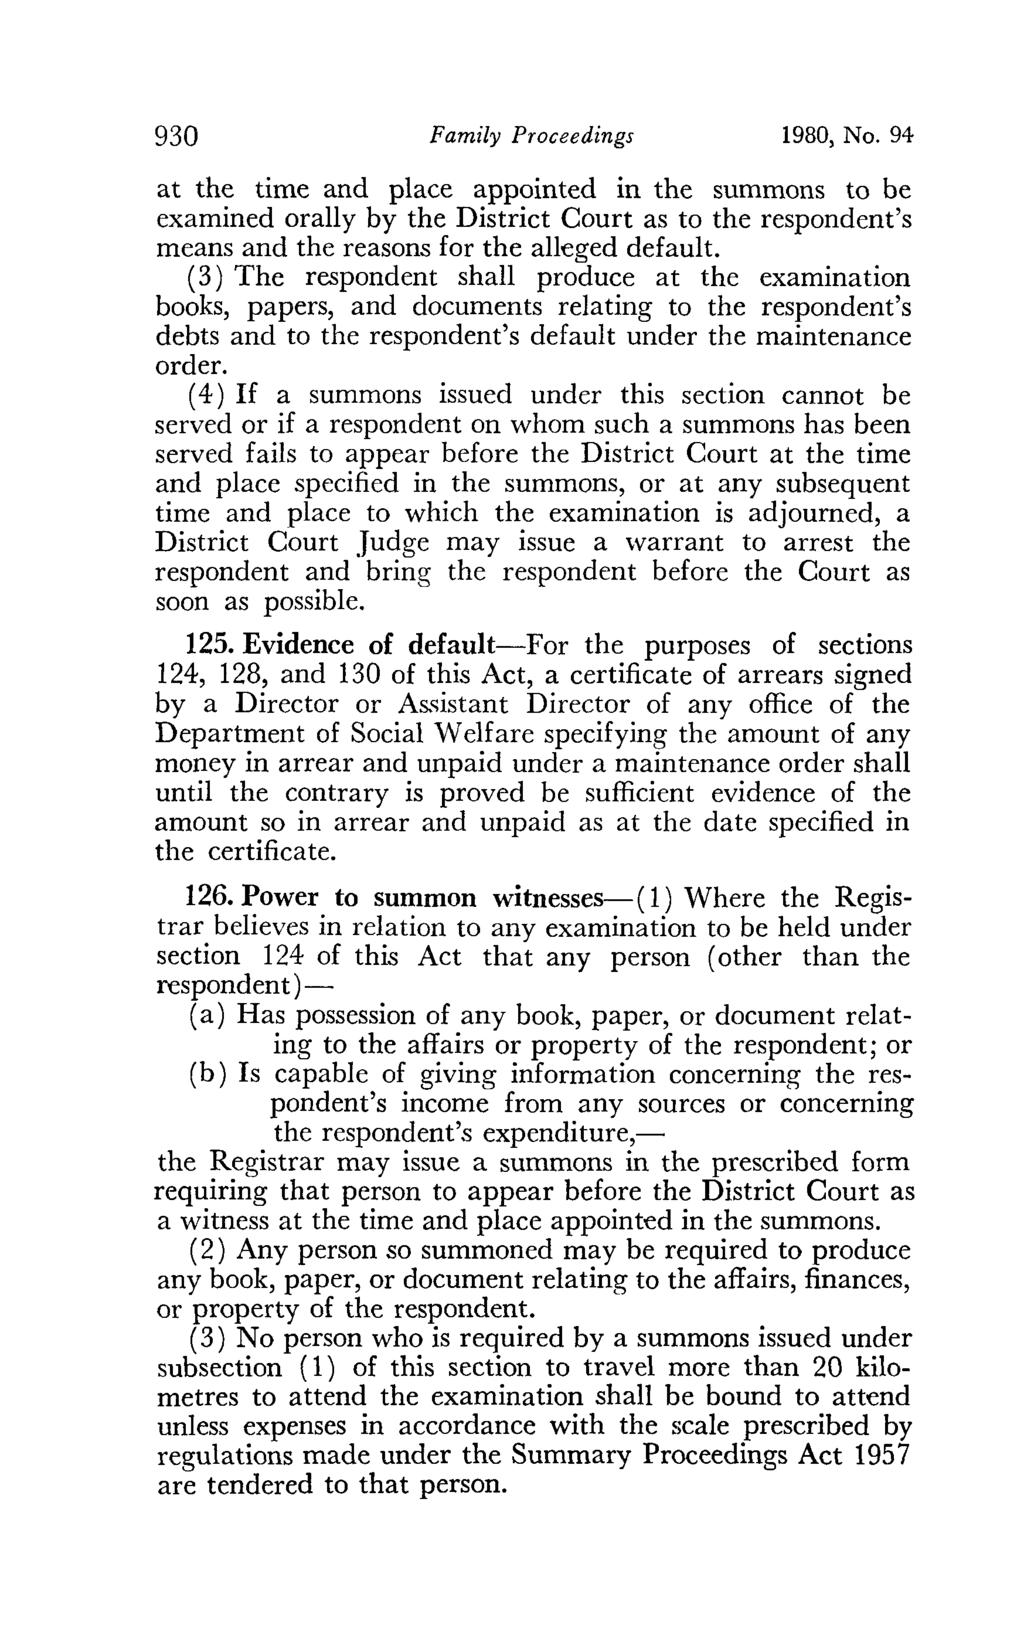 930 Family Proceedings 1980, No. 94 at the time and place appointed in the summons to be examined orally by the District Court as to the respondent's means and the reasons for the alleged default.